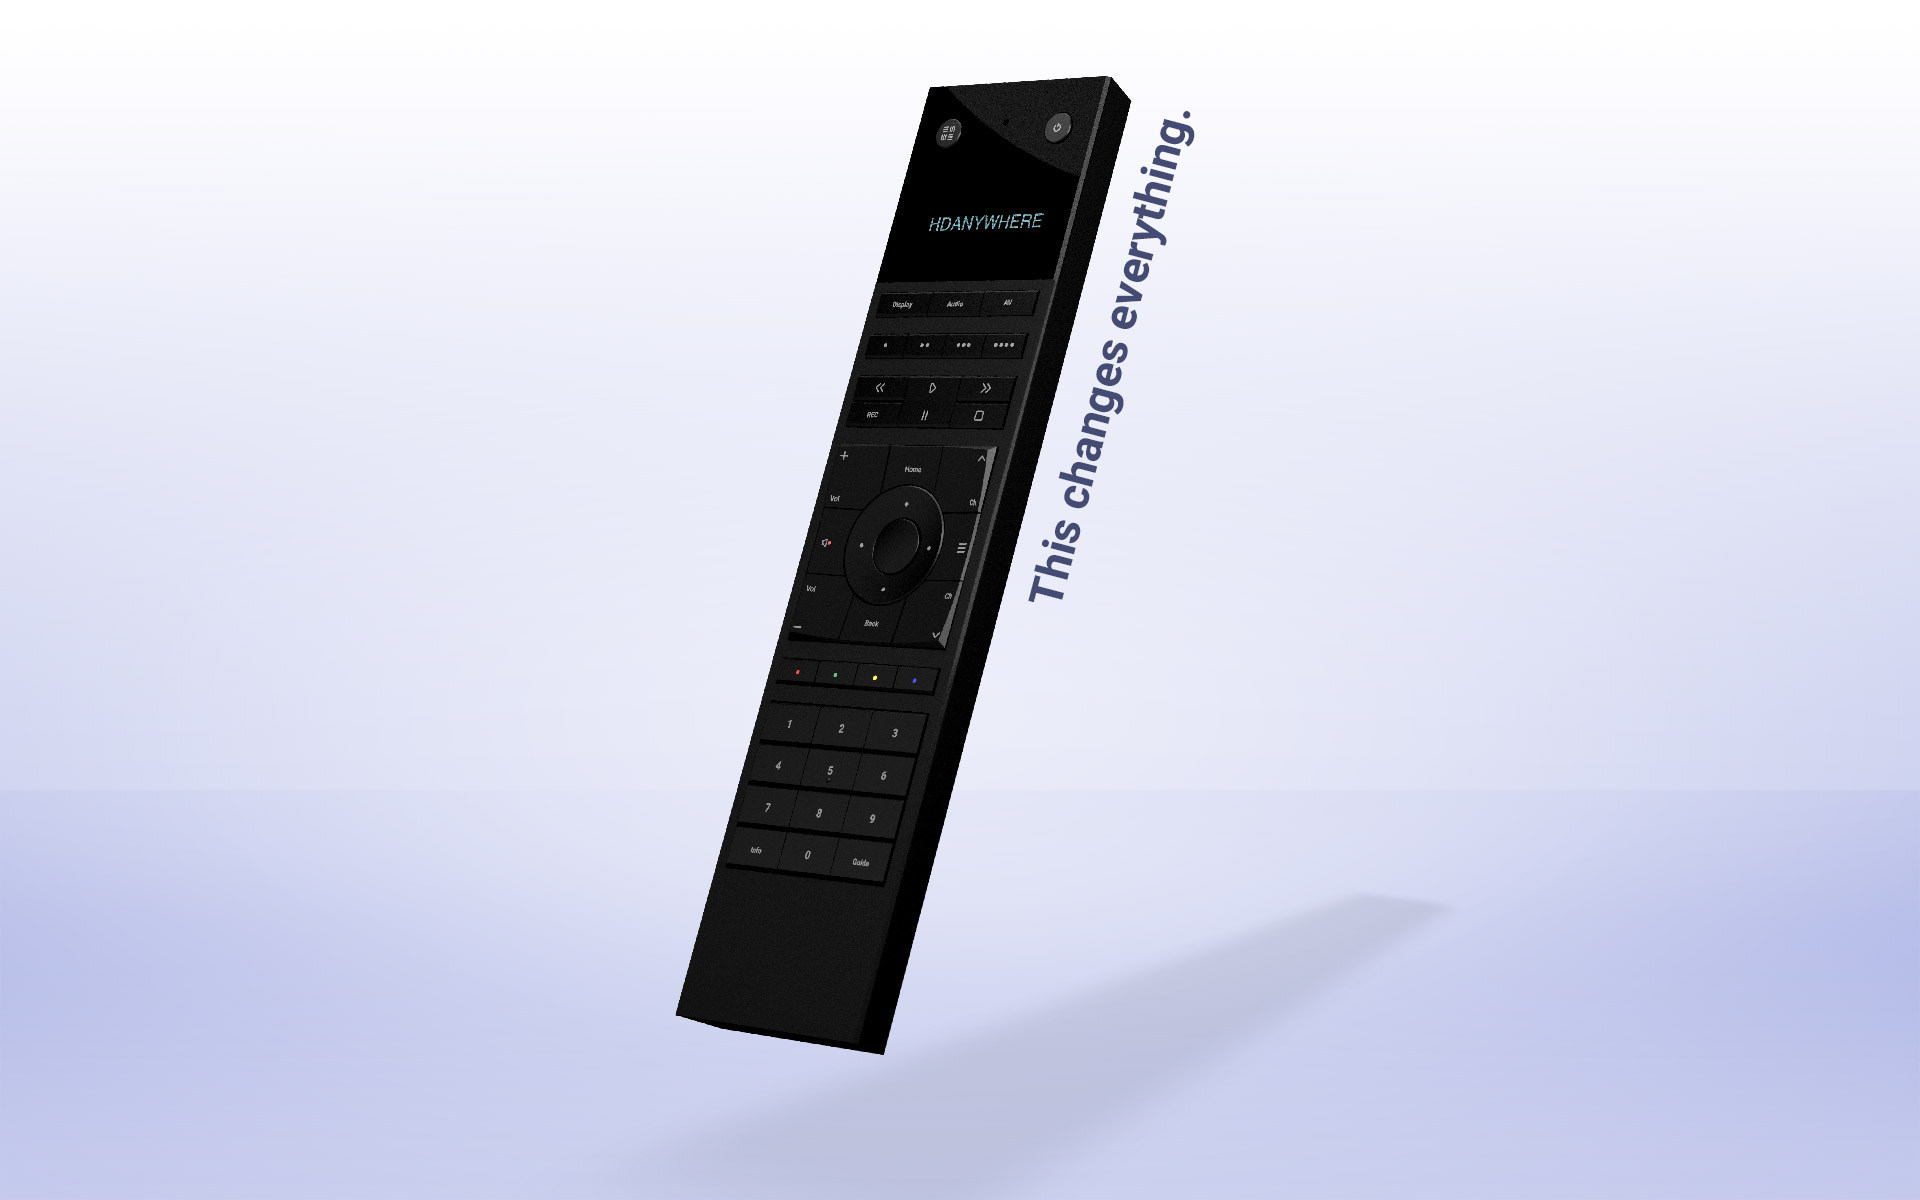 The uControl Remote